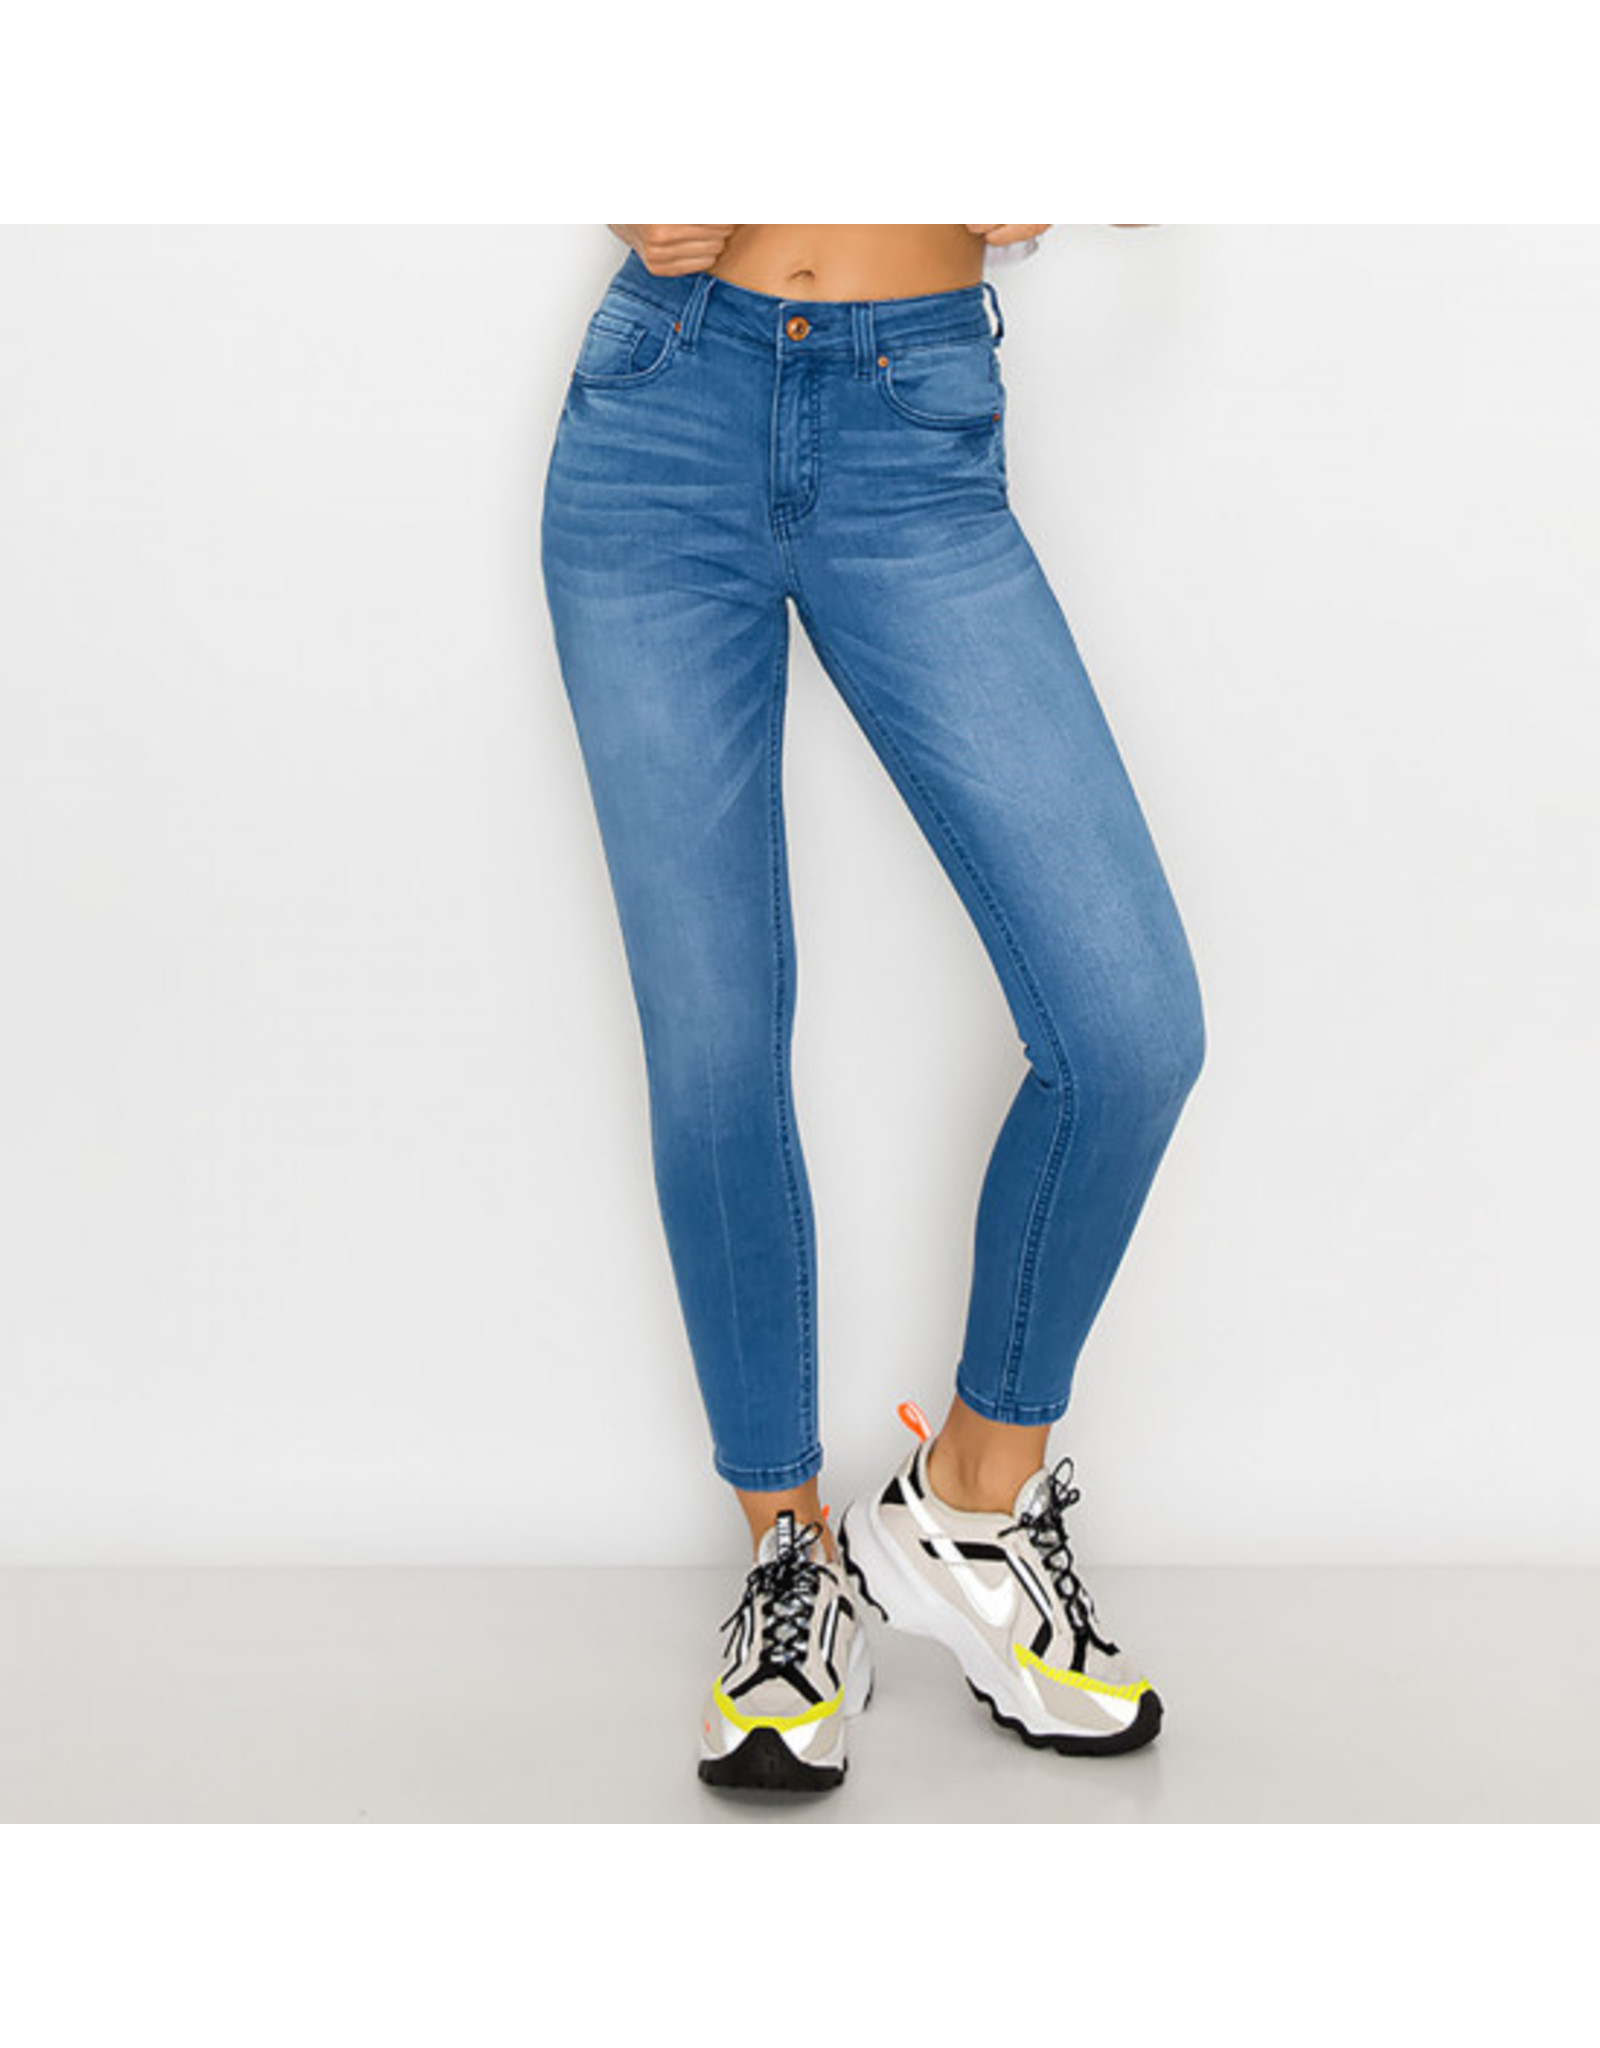 WOMEN HIGH WAIST ANKLE JEANS 90238 - Oly's Home Fashion